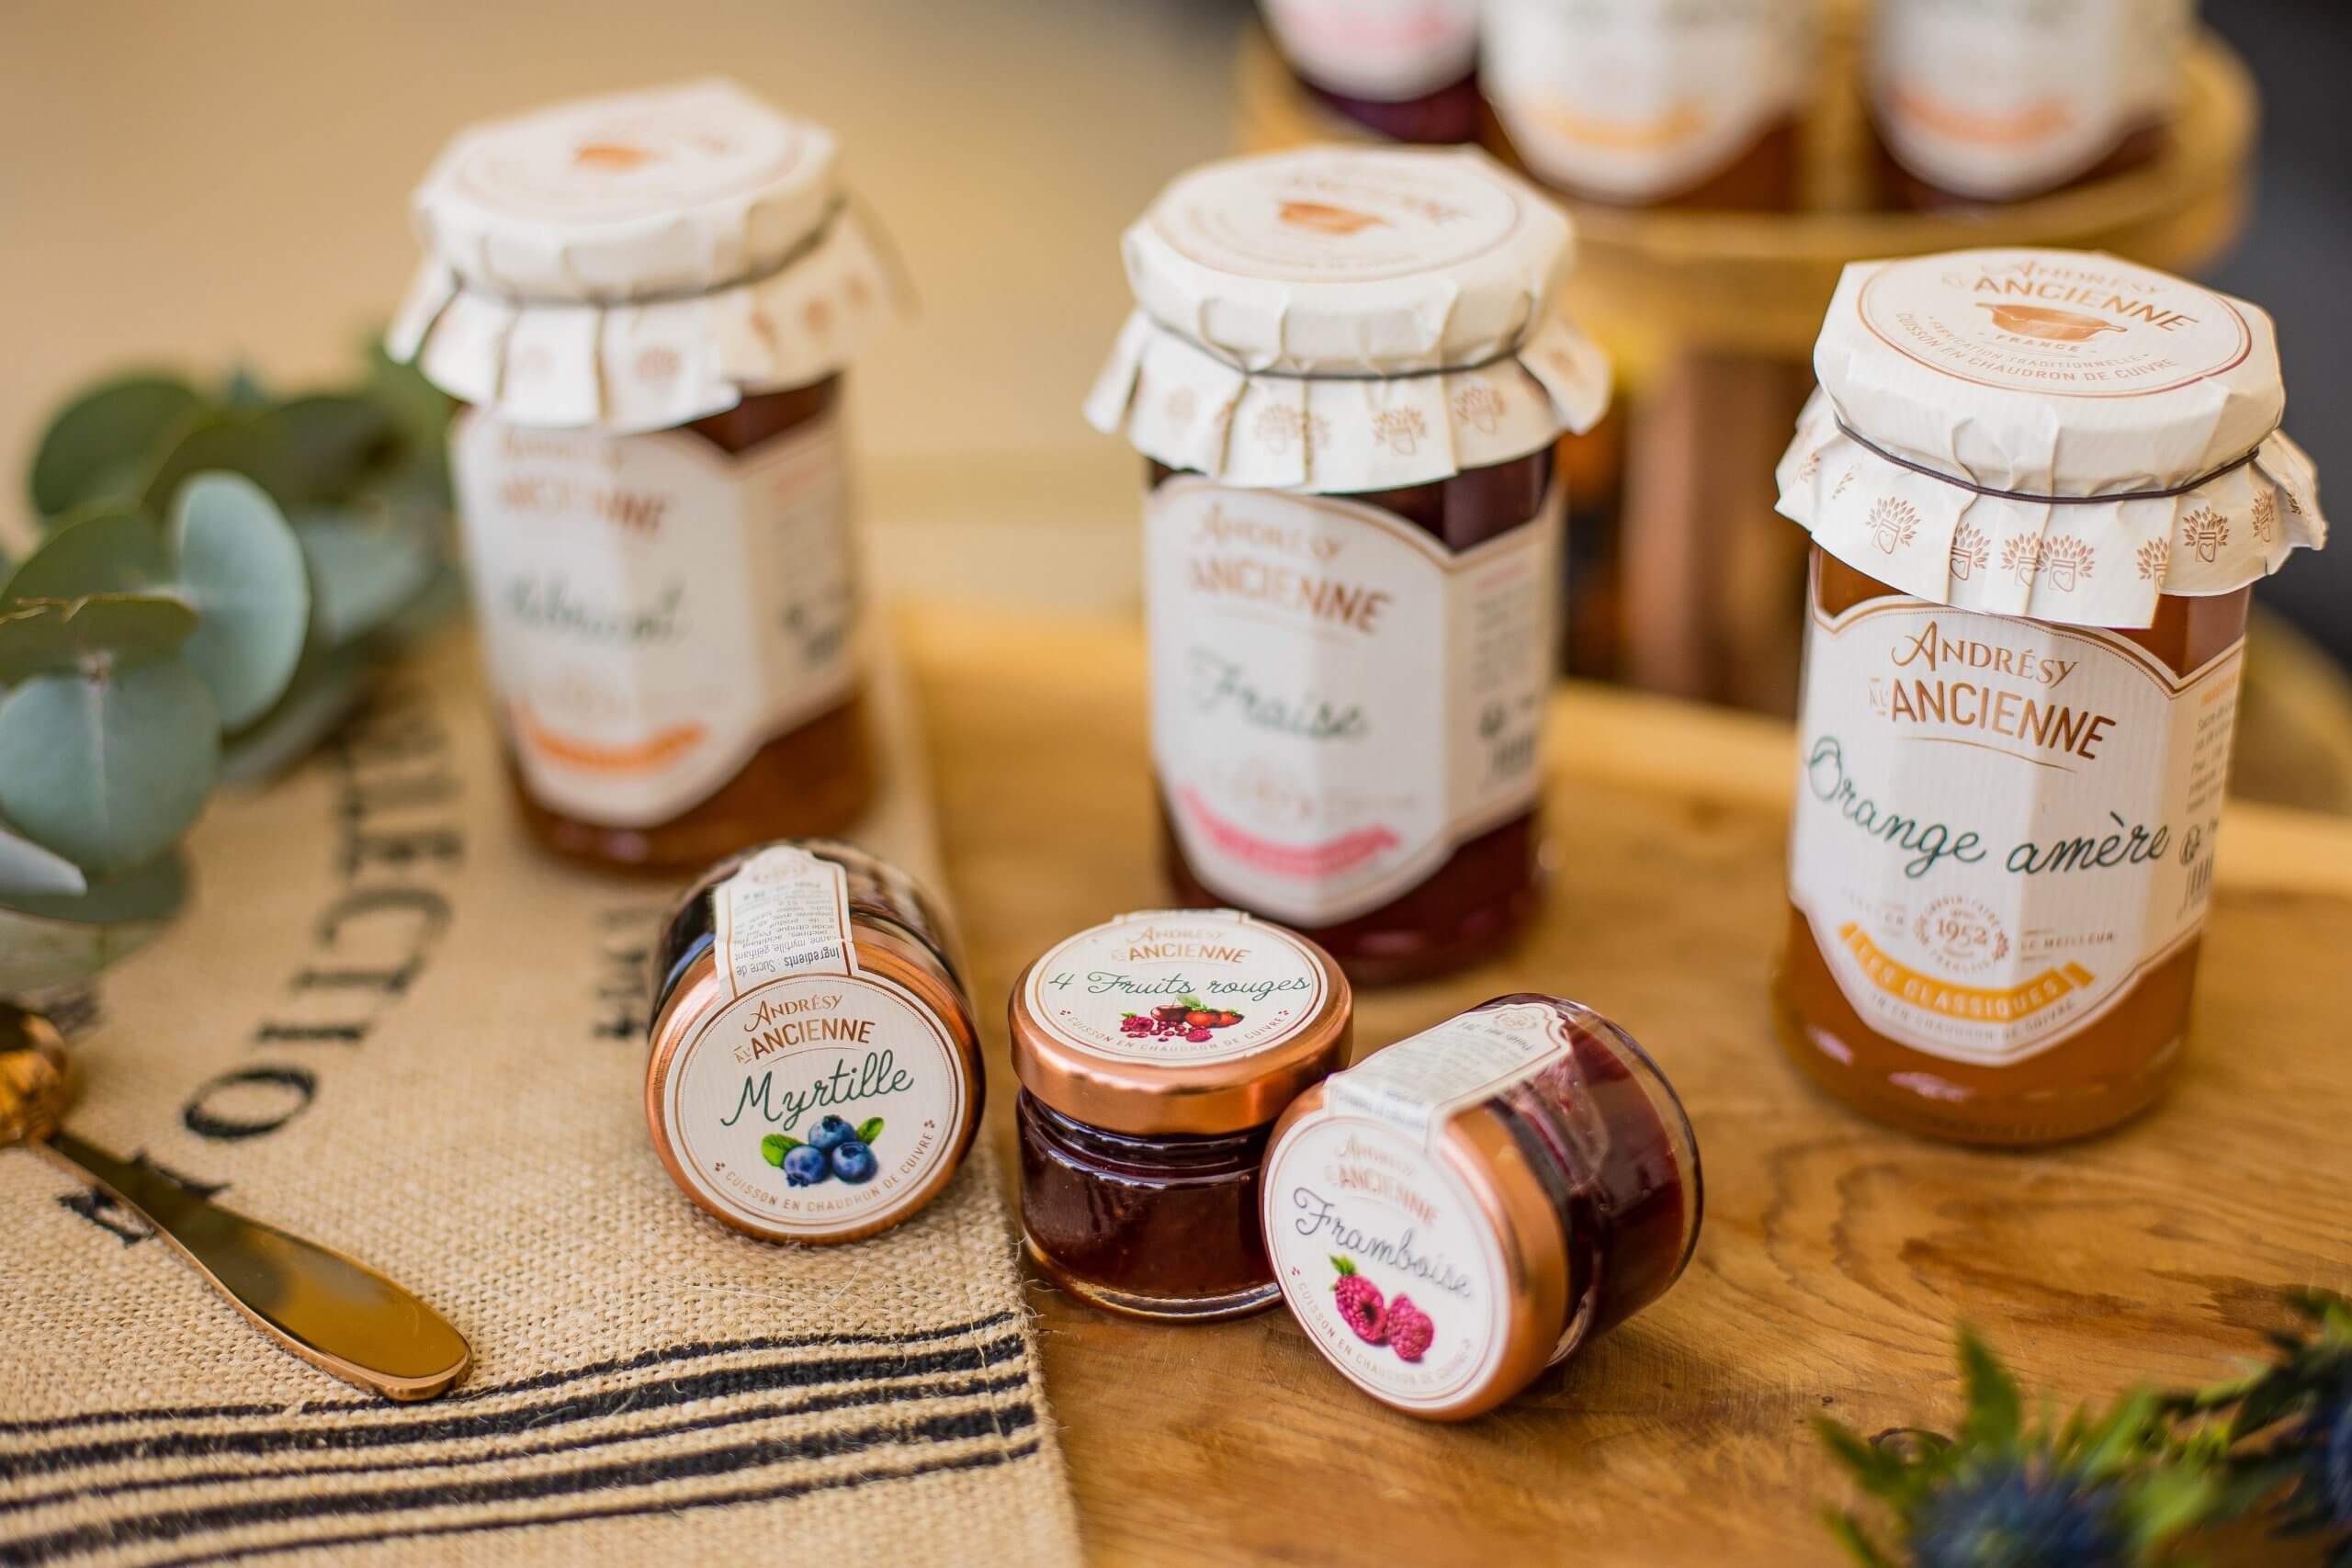 Andrésy Confitures - brand of artisanal jams of best french know how